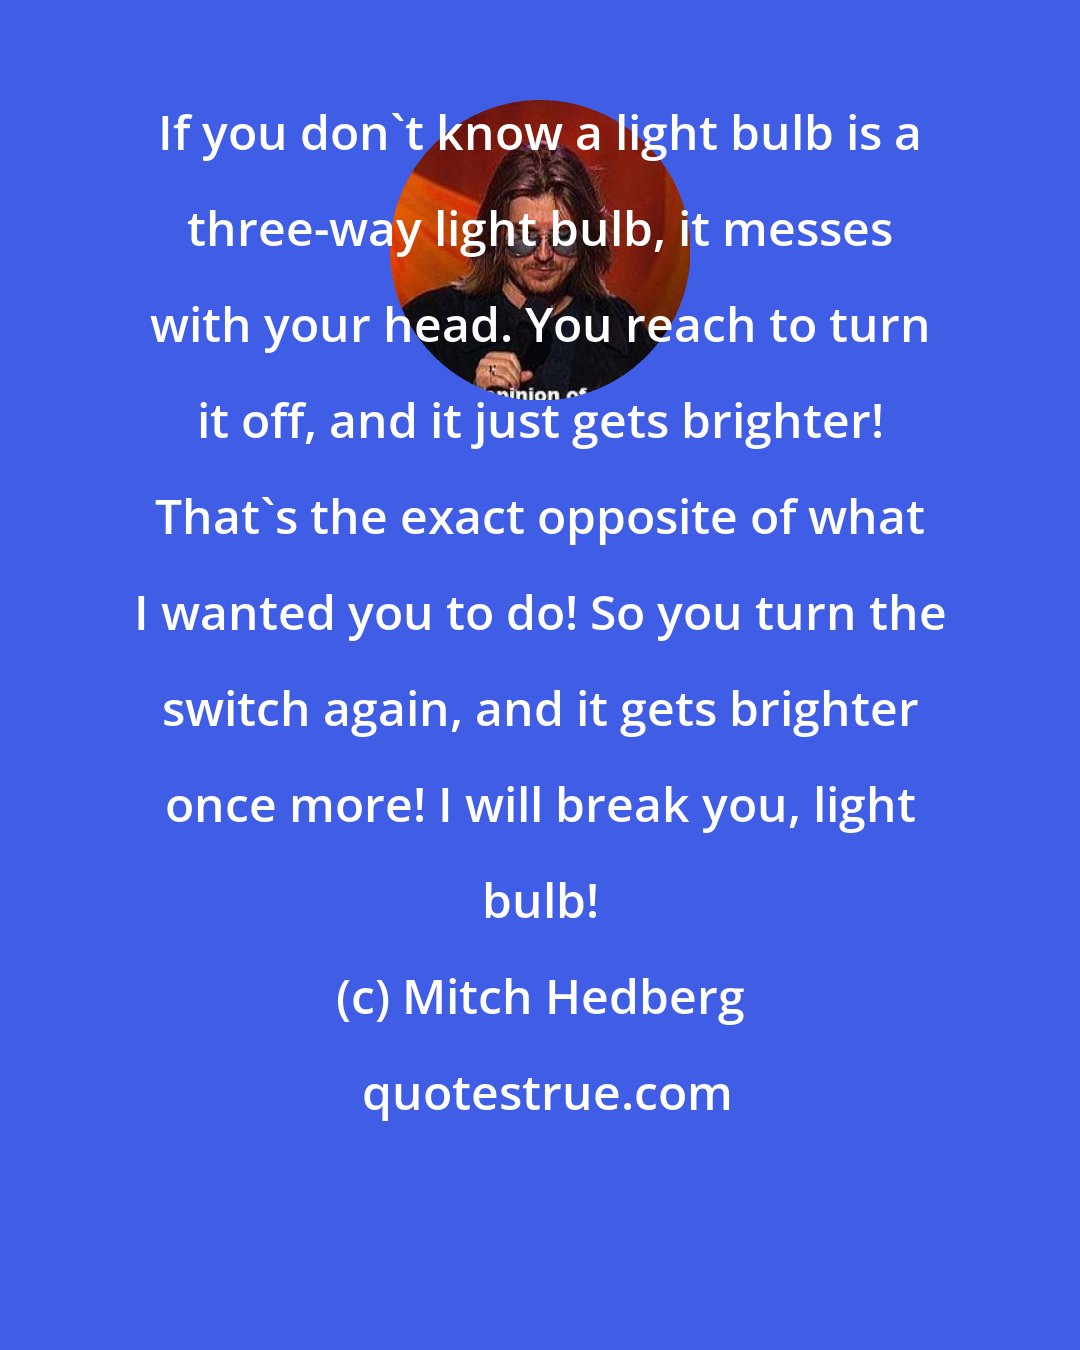 Mitch Hedberg: If you don't know a light bulb is a three-way light bulb, it messes with your head. You reach to turn it off, and it just gets brighter! That's the exact opposite of what I wanted you to do! So you turn the switch again, and it gets brighter once more! I will break you, light bulb!